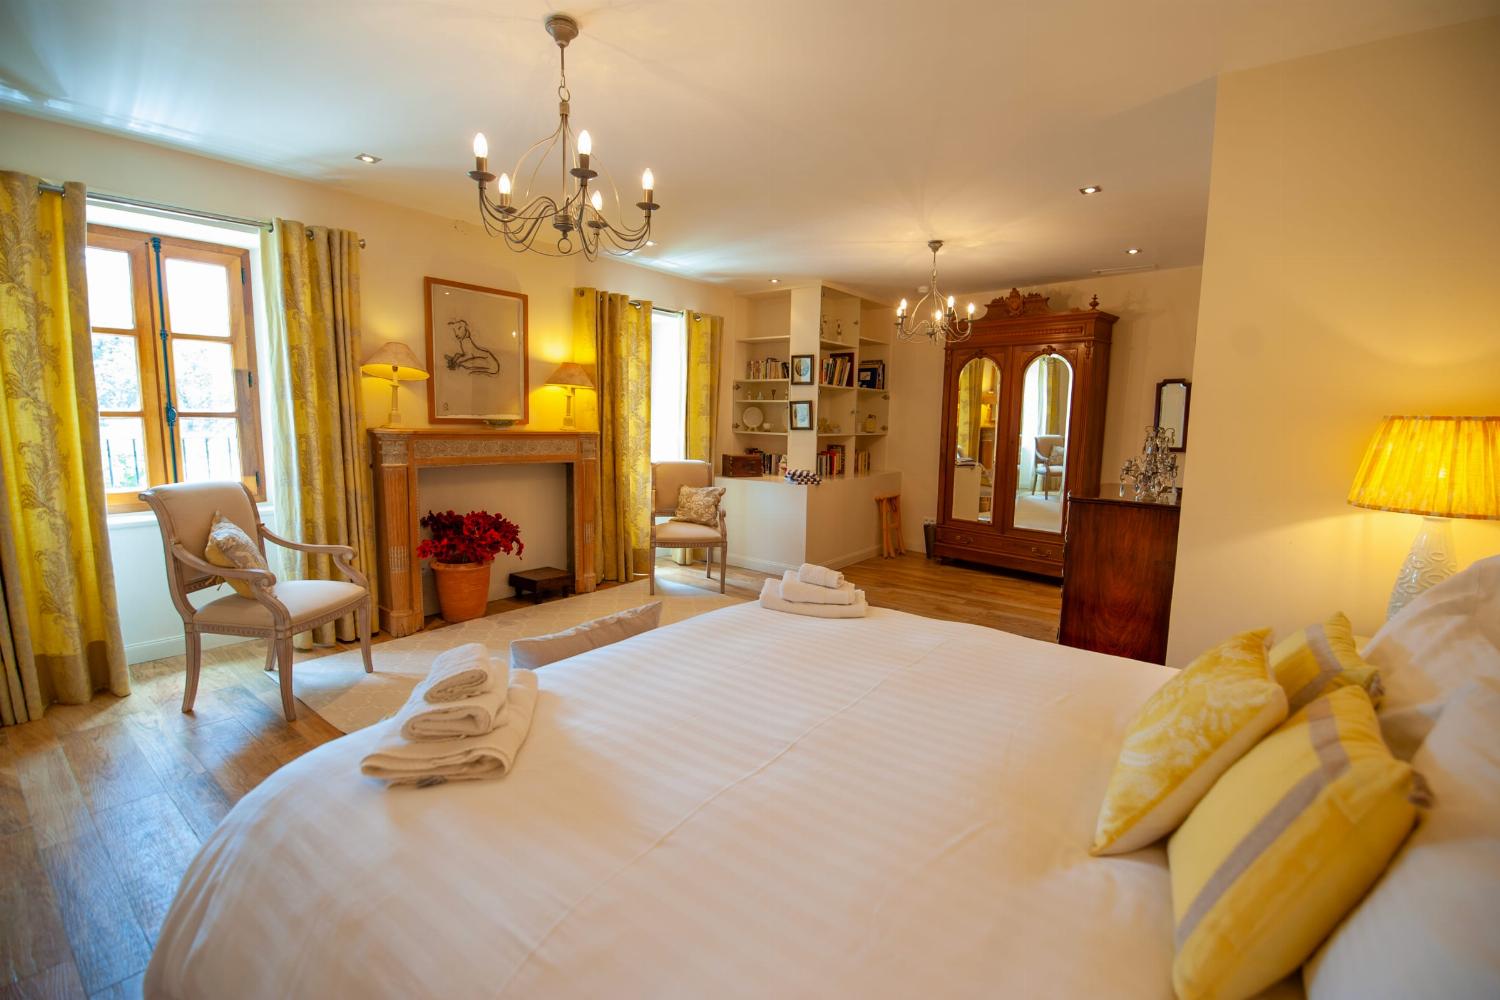 Yellow bedroom | Holiday accommodation in the South of France